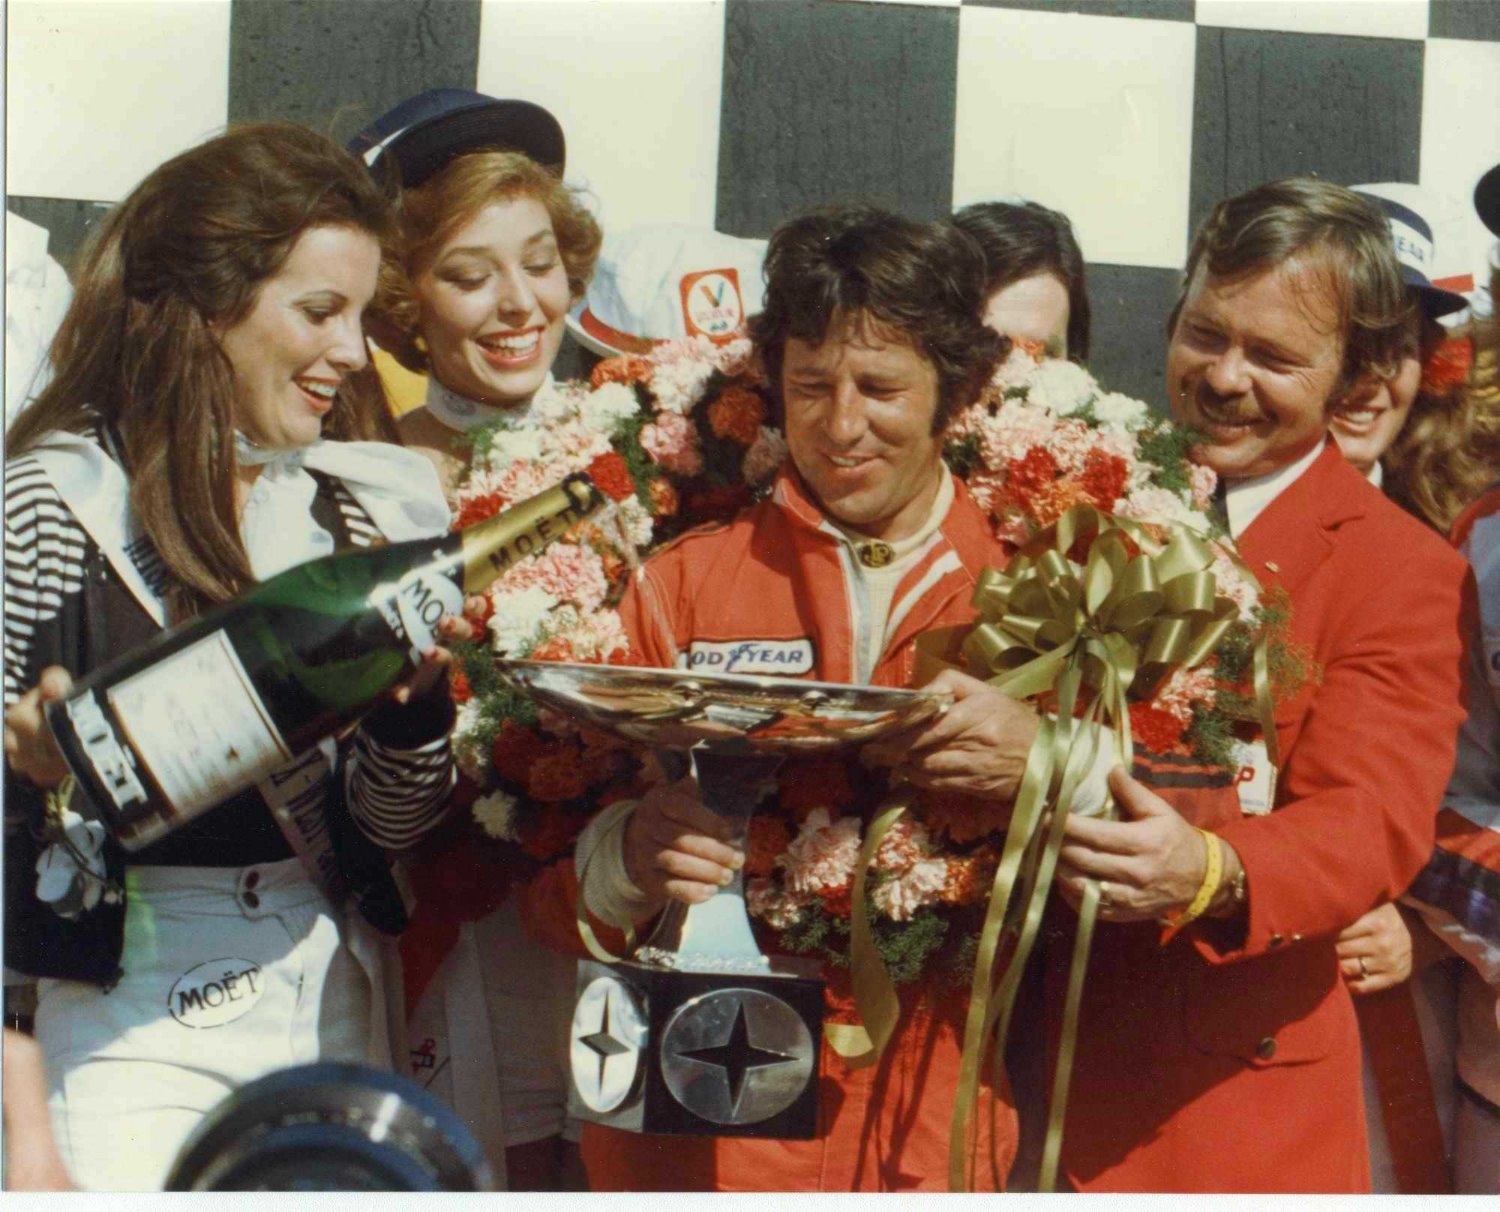 April 3, 1977 Mario Andretti's historic performance in the "race that saved the race" saw him win the Grand Prix of Long Beach F1 race for the first of four times in his career. His popular win catapulted the race to national and international recognition.